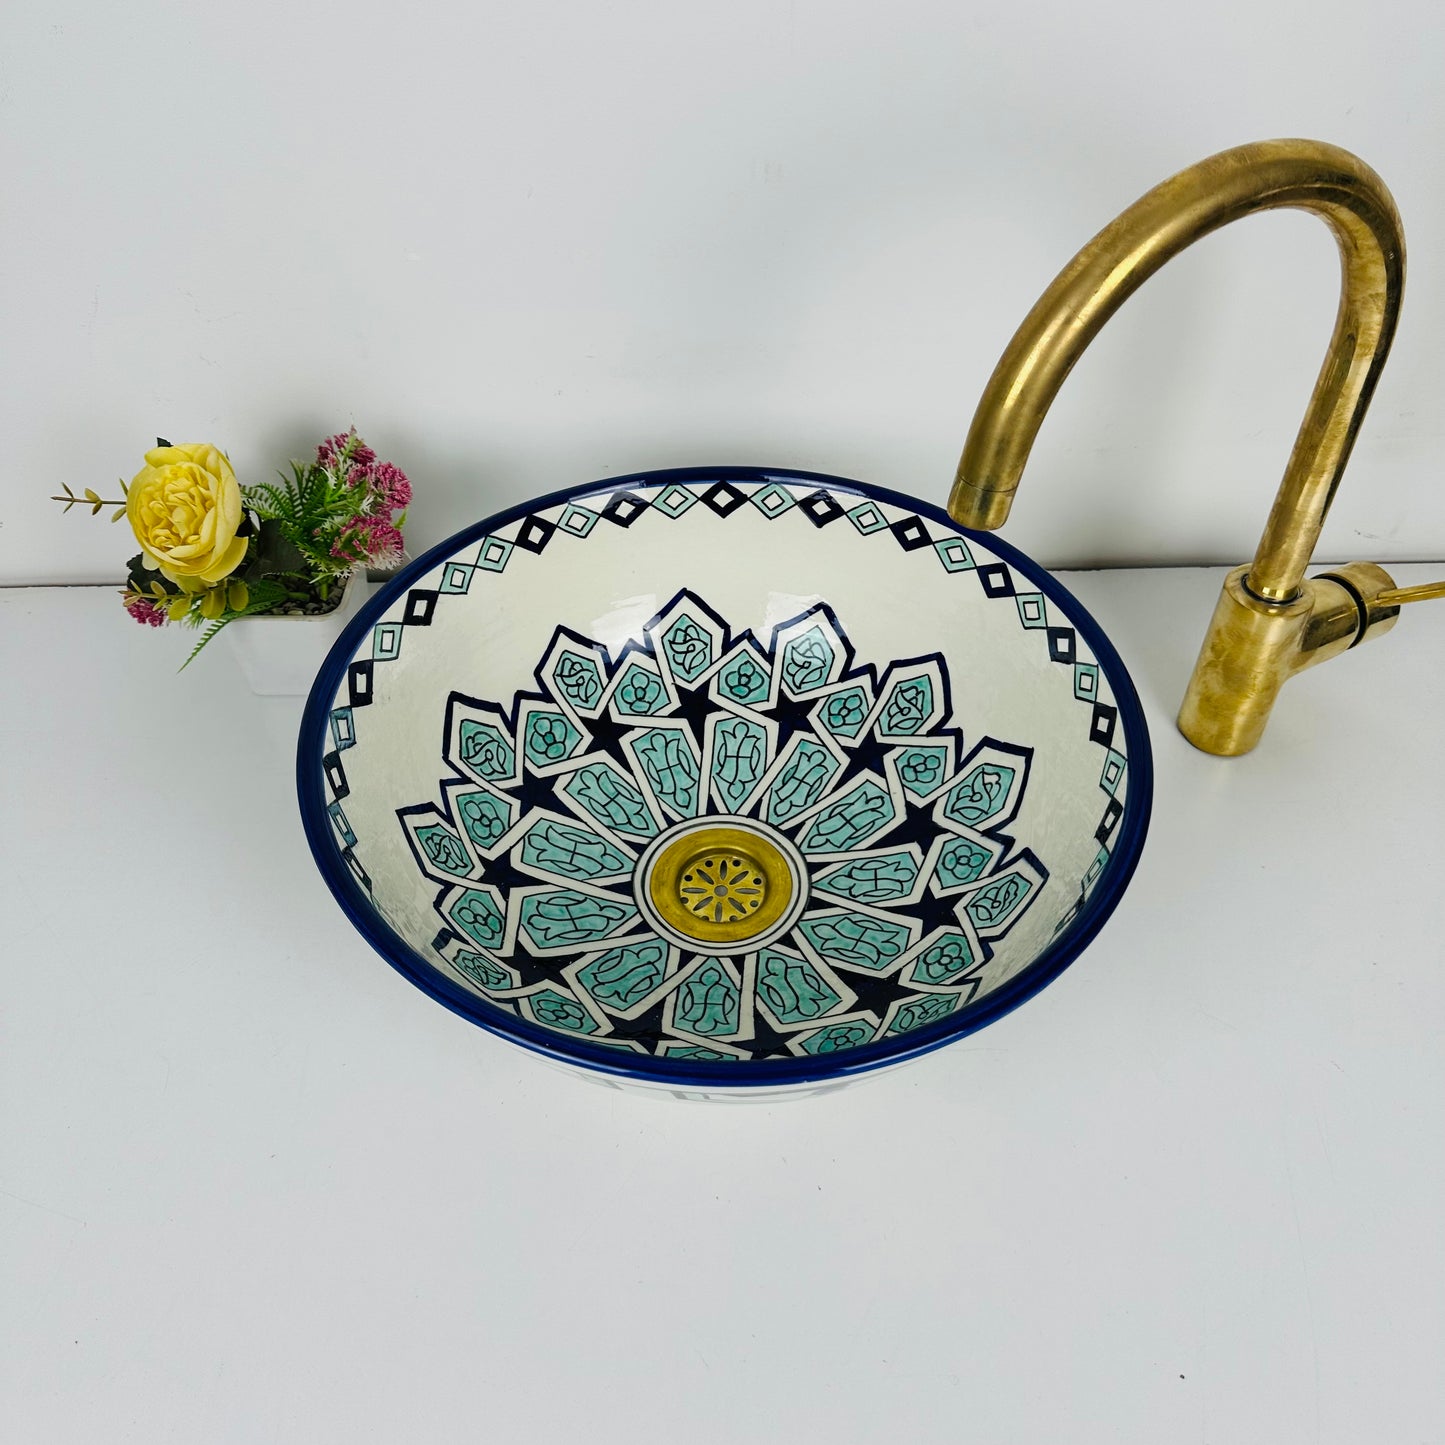 Oceanic Symphony: Handcrafted Ceramic Sink with Variegated Blues and Hand-Painted Shapes